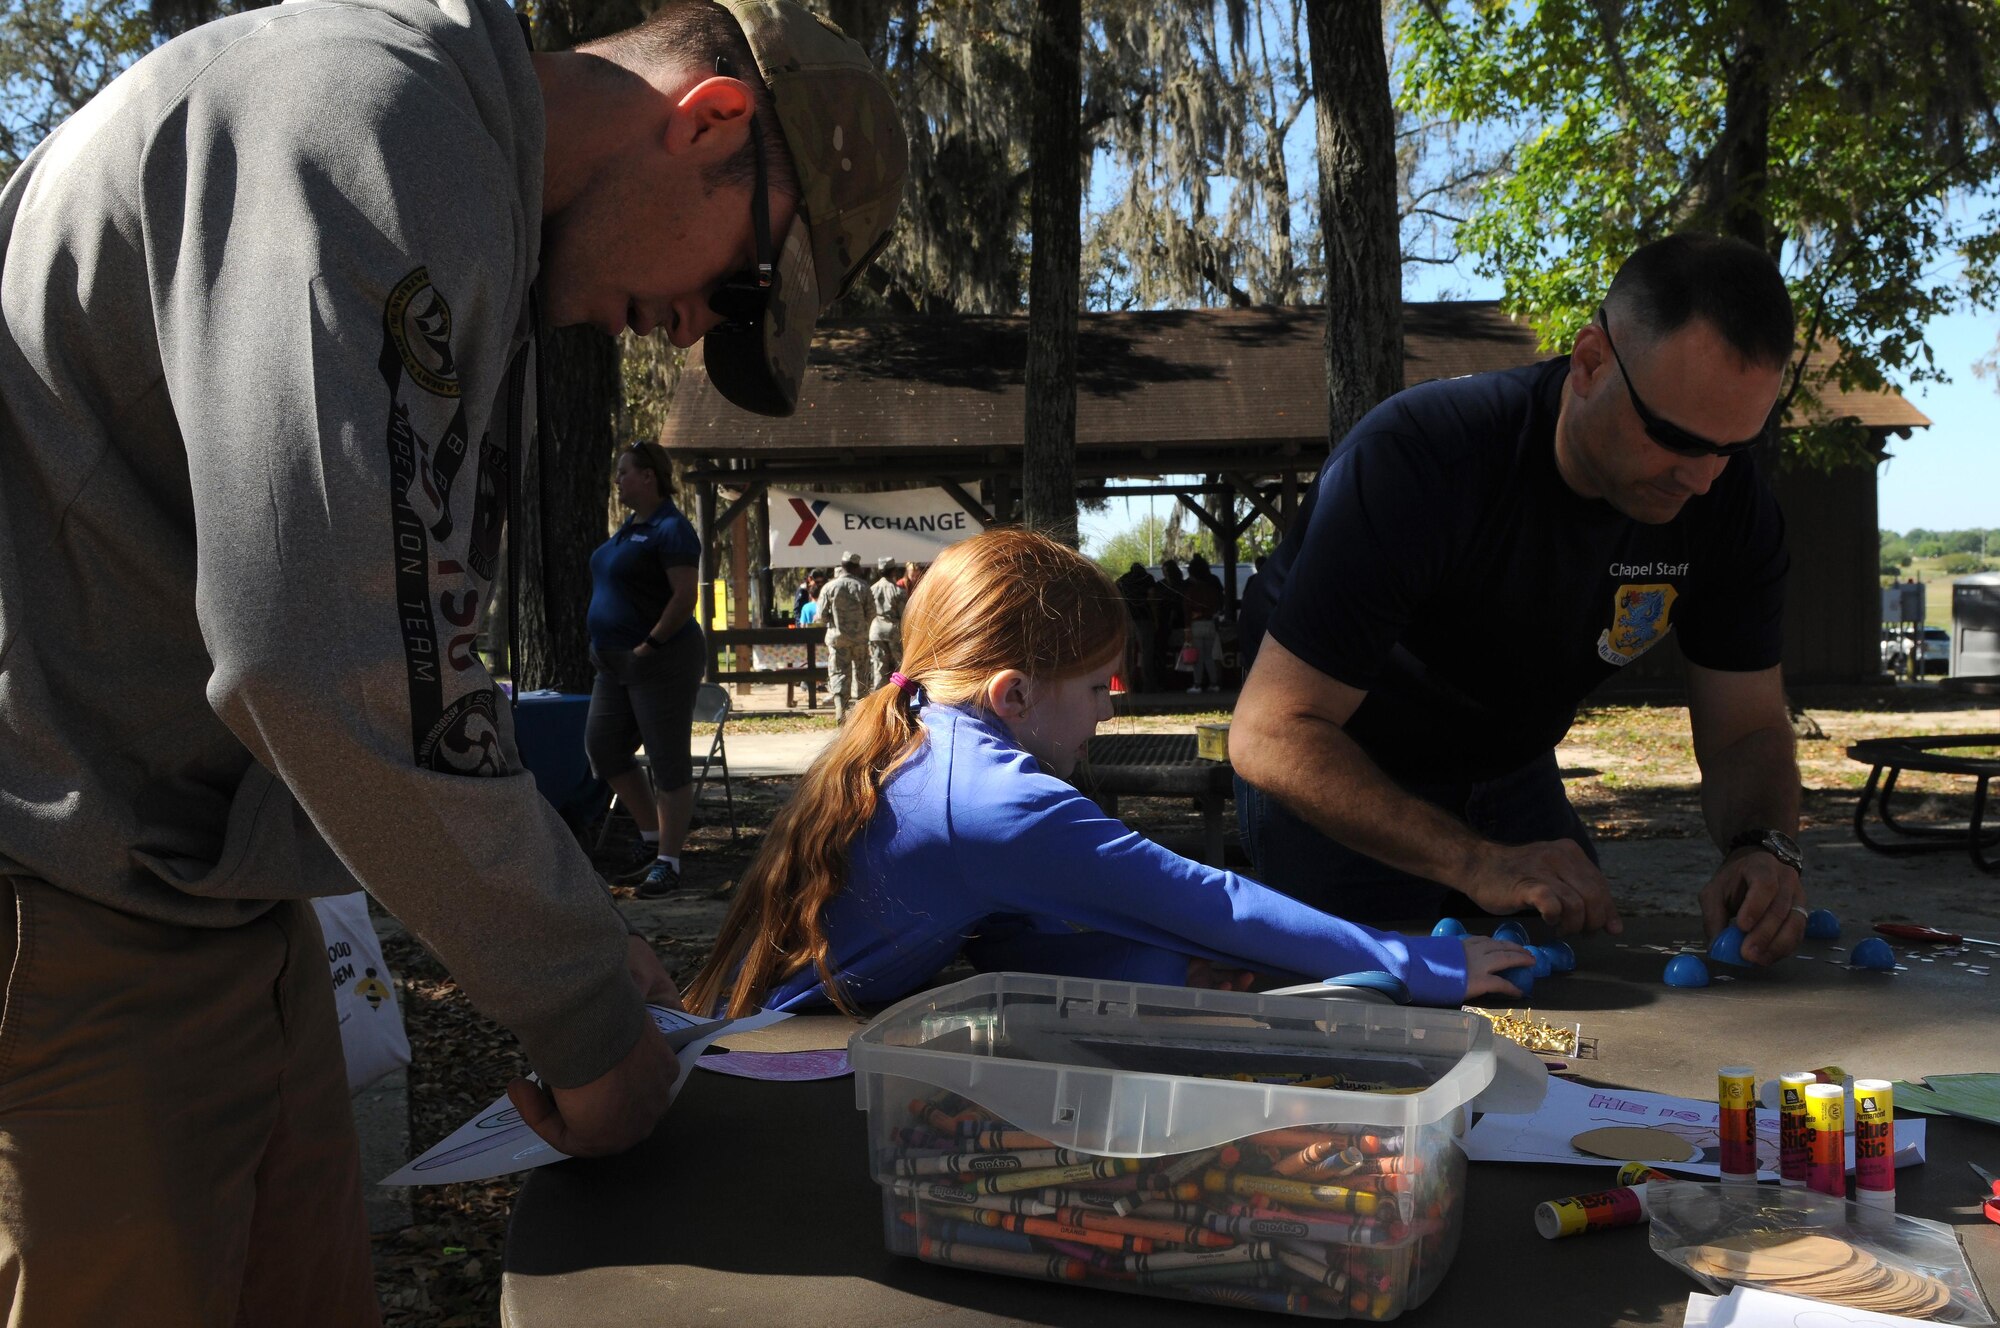 Team Keesler members make arts and crafts during Child Pride Day April 8, 2017, on Keesler Air Force Base, Miss. The event festivities included a parade, Easter egg hunt, arts and crafts and information booths for more than 1,000 children and family members in celebration of the Month of the Military Child. (U.S. Air Force photo by Senior Airman Holly Mansfield)